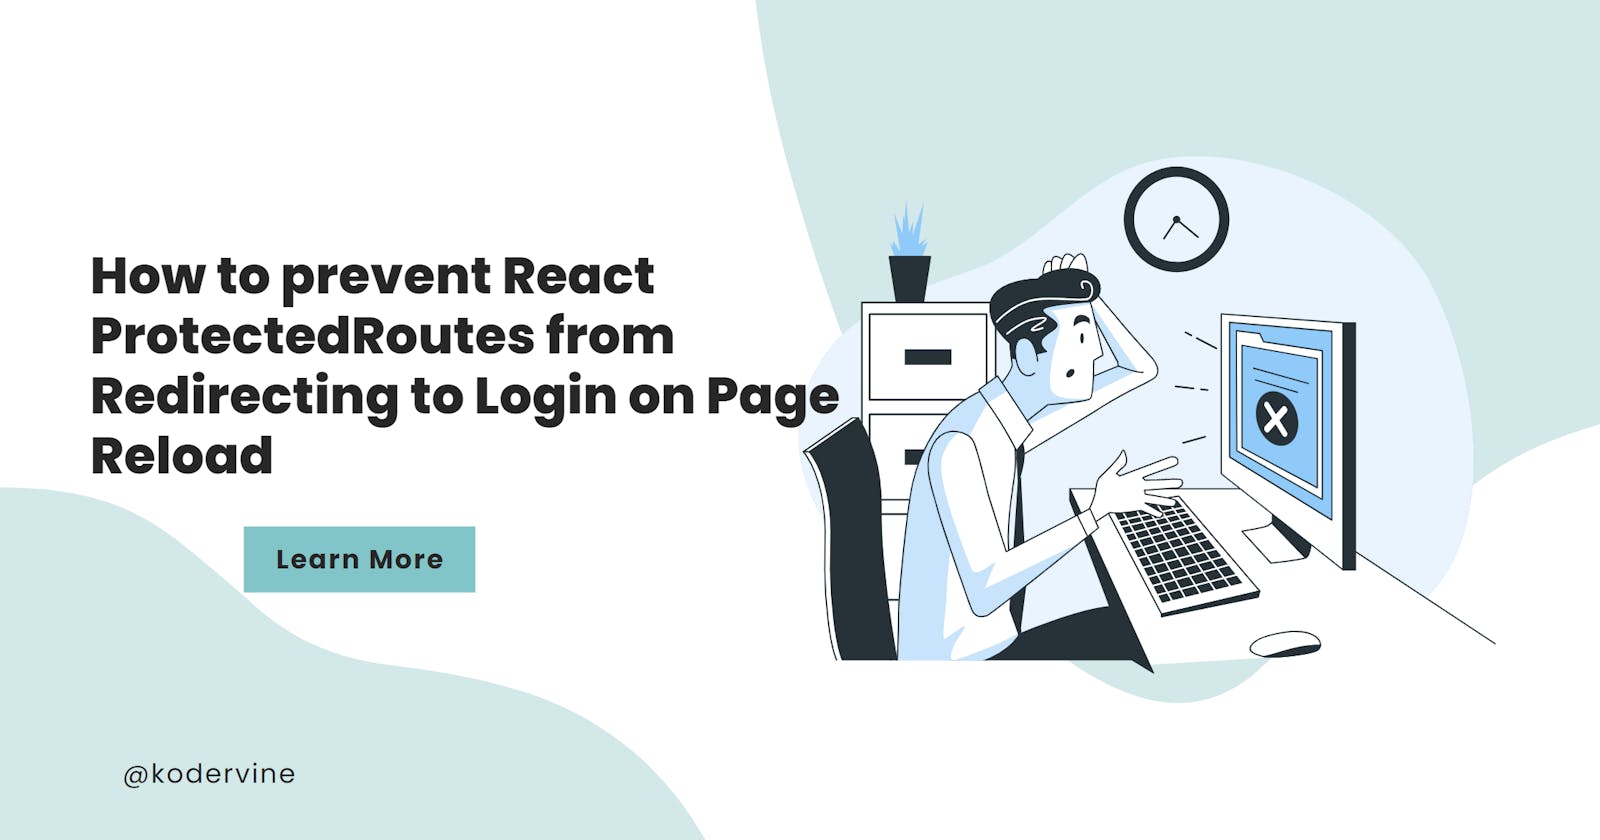 How to prevent React ProtectedRoutes from Redirecting to Login on Page Reload